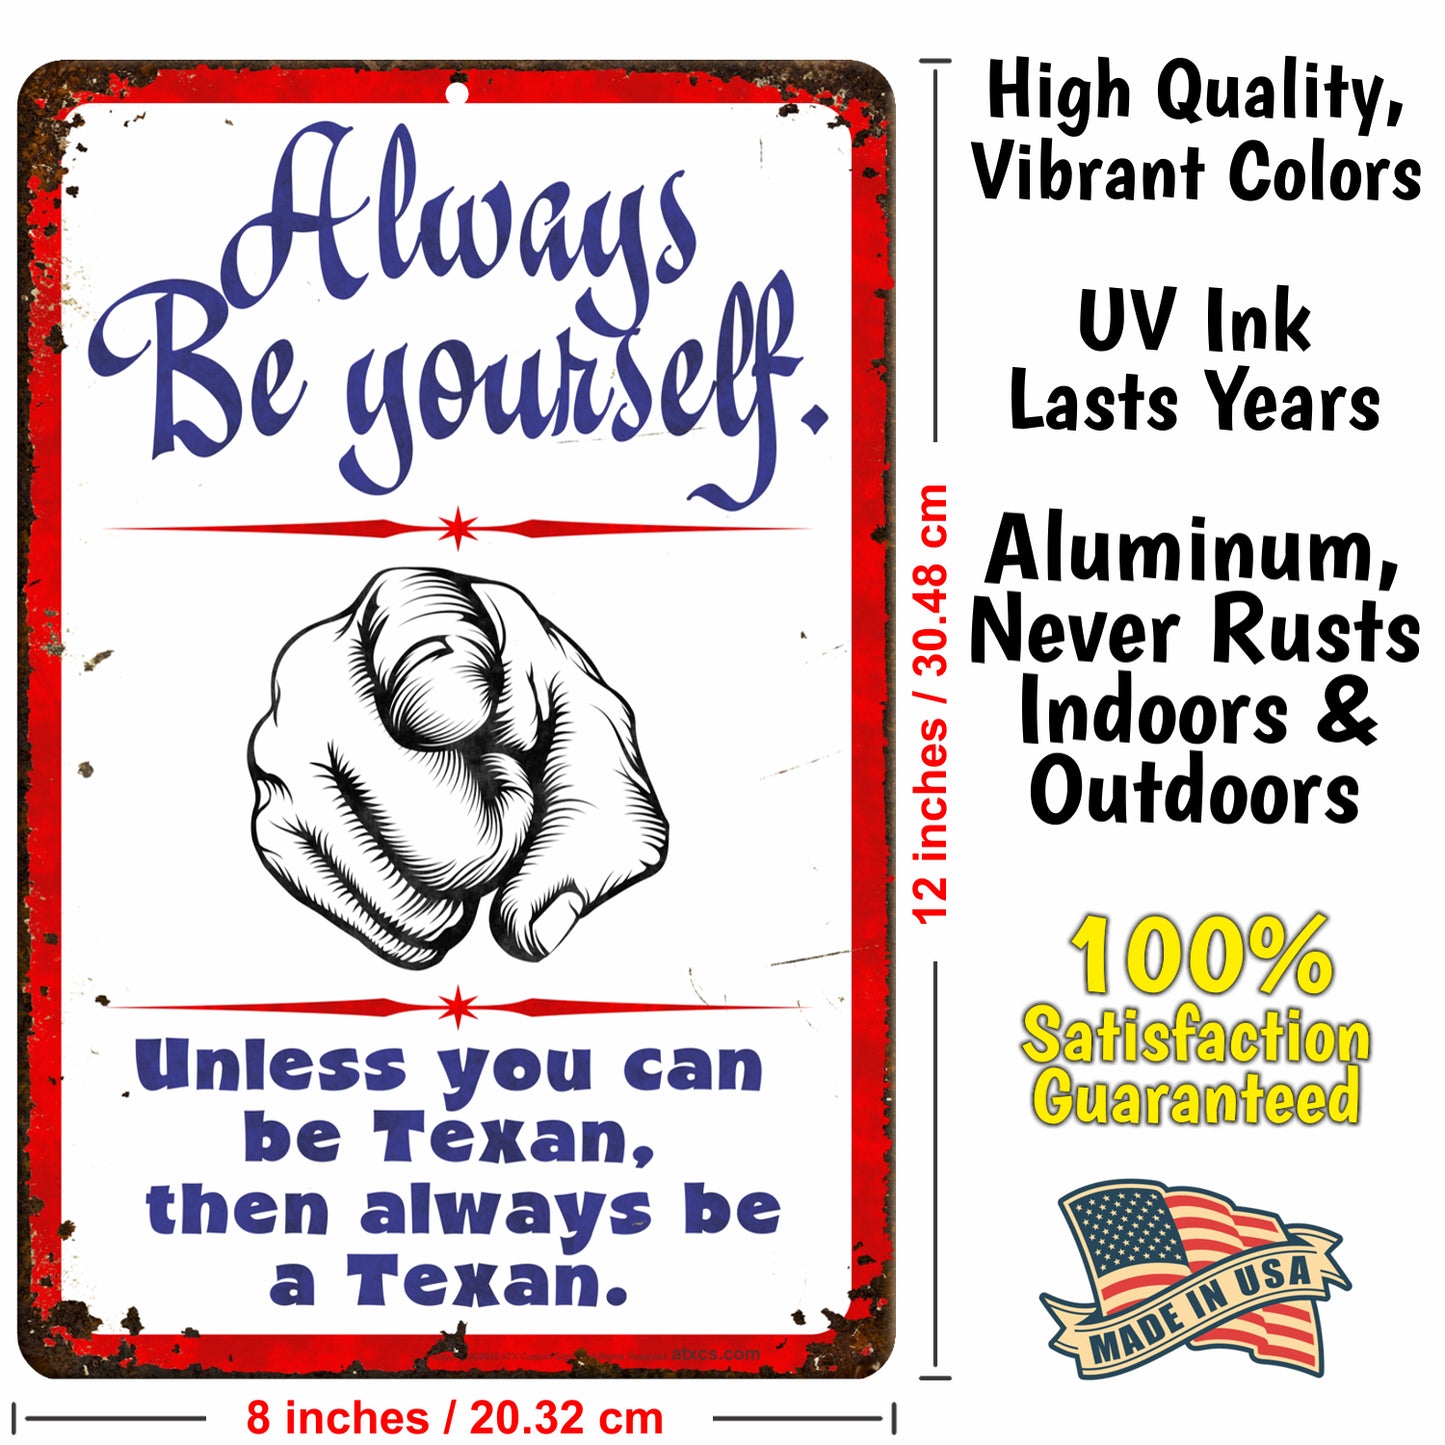 Always be Yourself. Unless You can be Texan, Then Always be a Texan. (Rusted Design) - Size 8 x 12